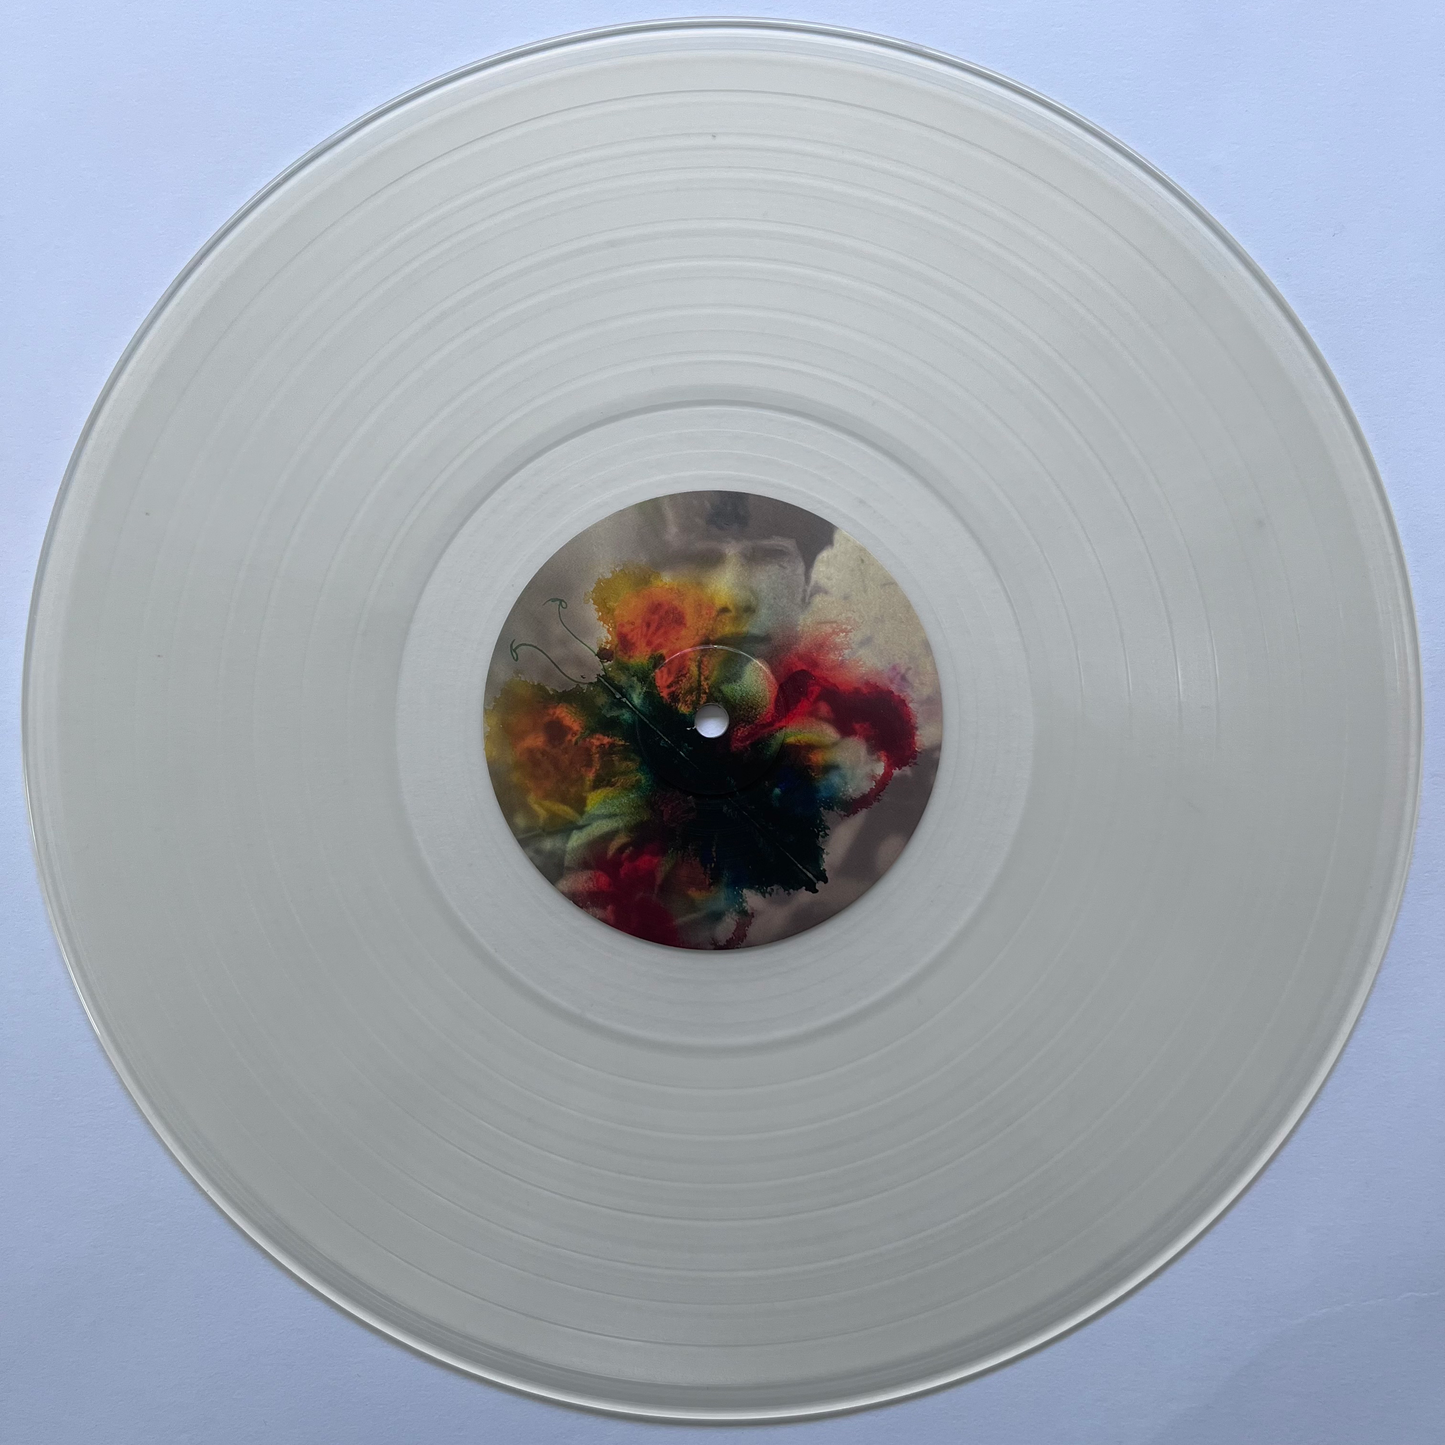 Reverberations (Travelling In Time) Limited Edition Clear Vinyl